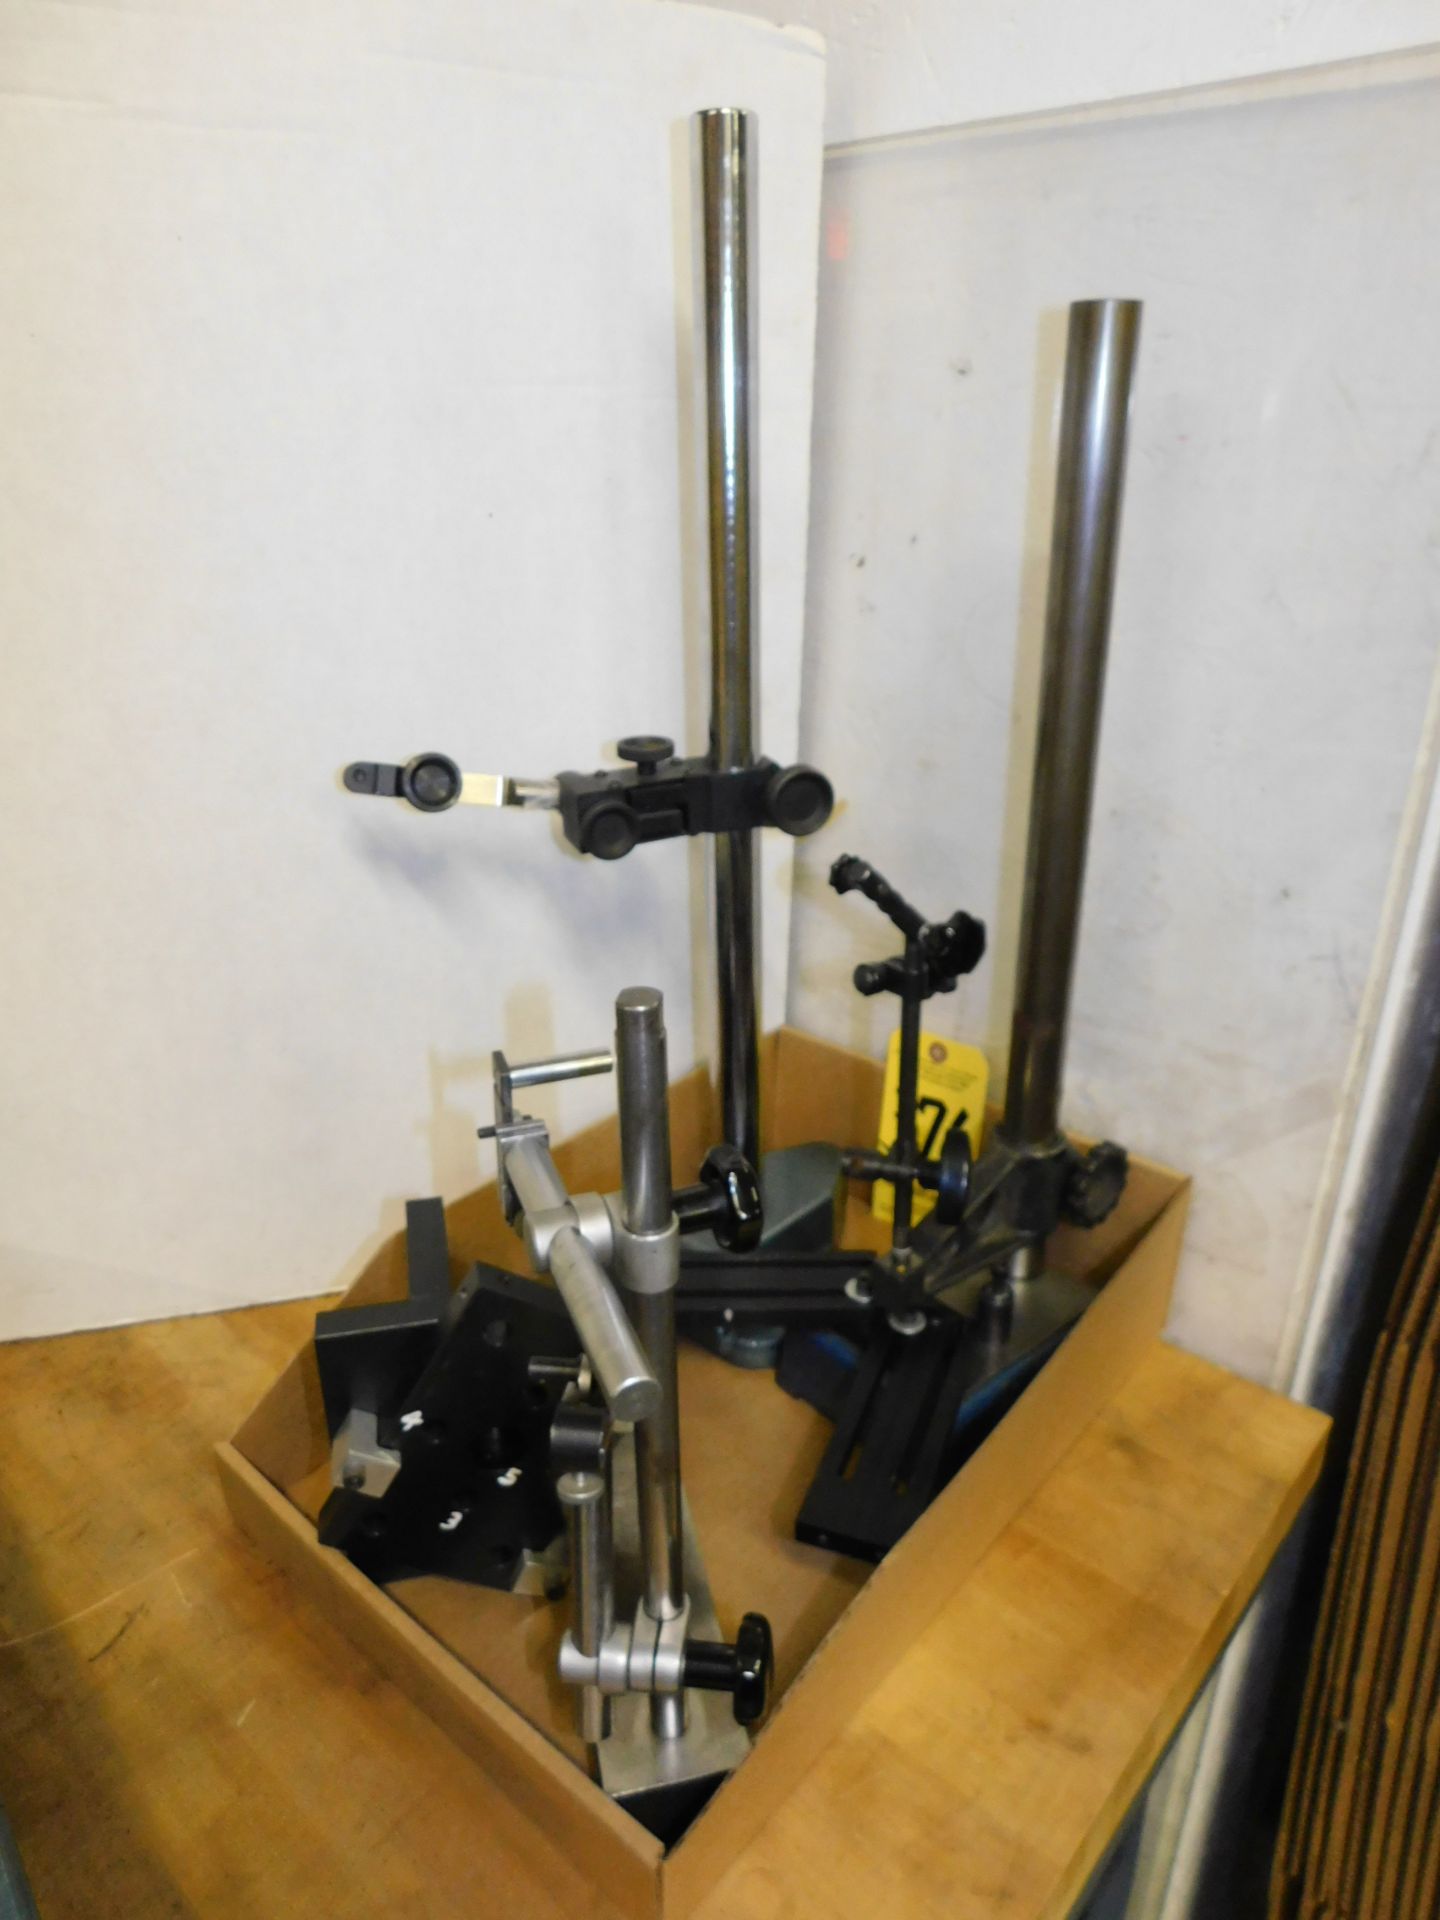 Miscellaneous Indicator Stands